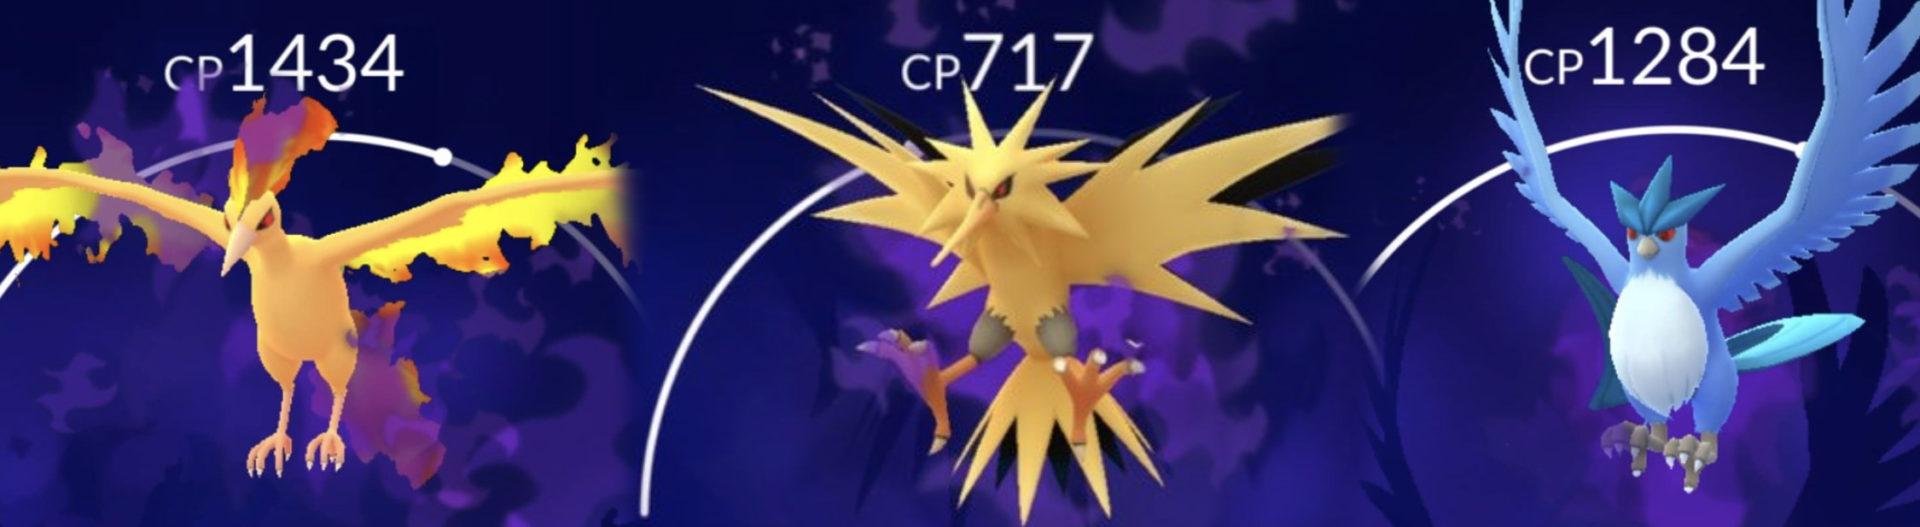 Bernie and Cream duo for shiny shadow Moltres! We successfully duoed S